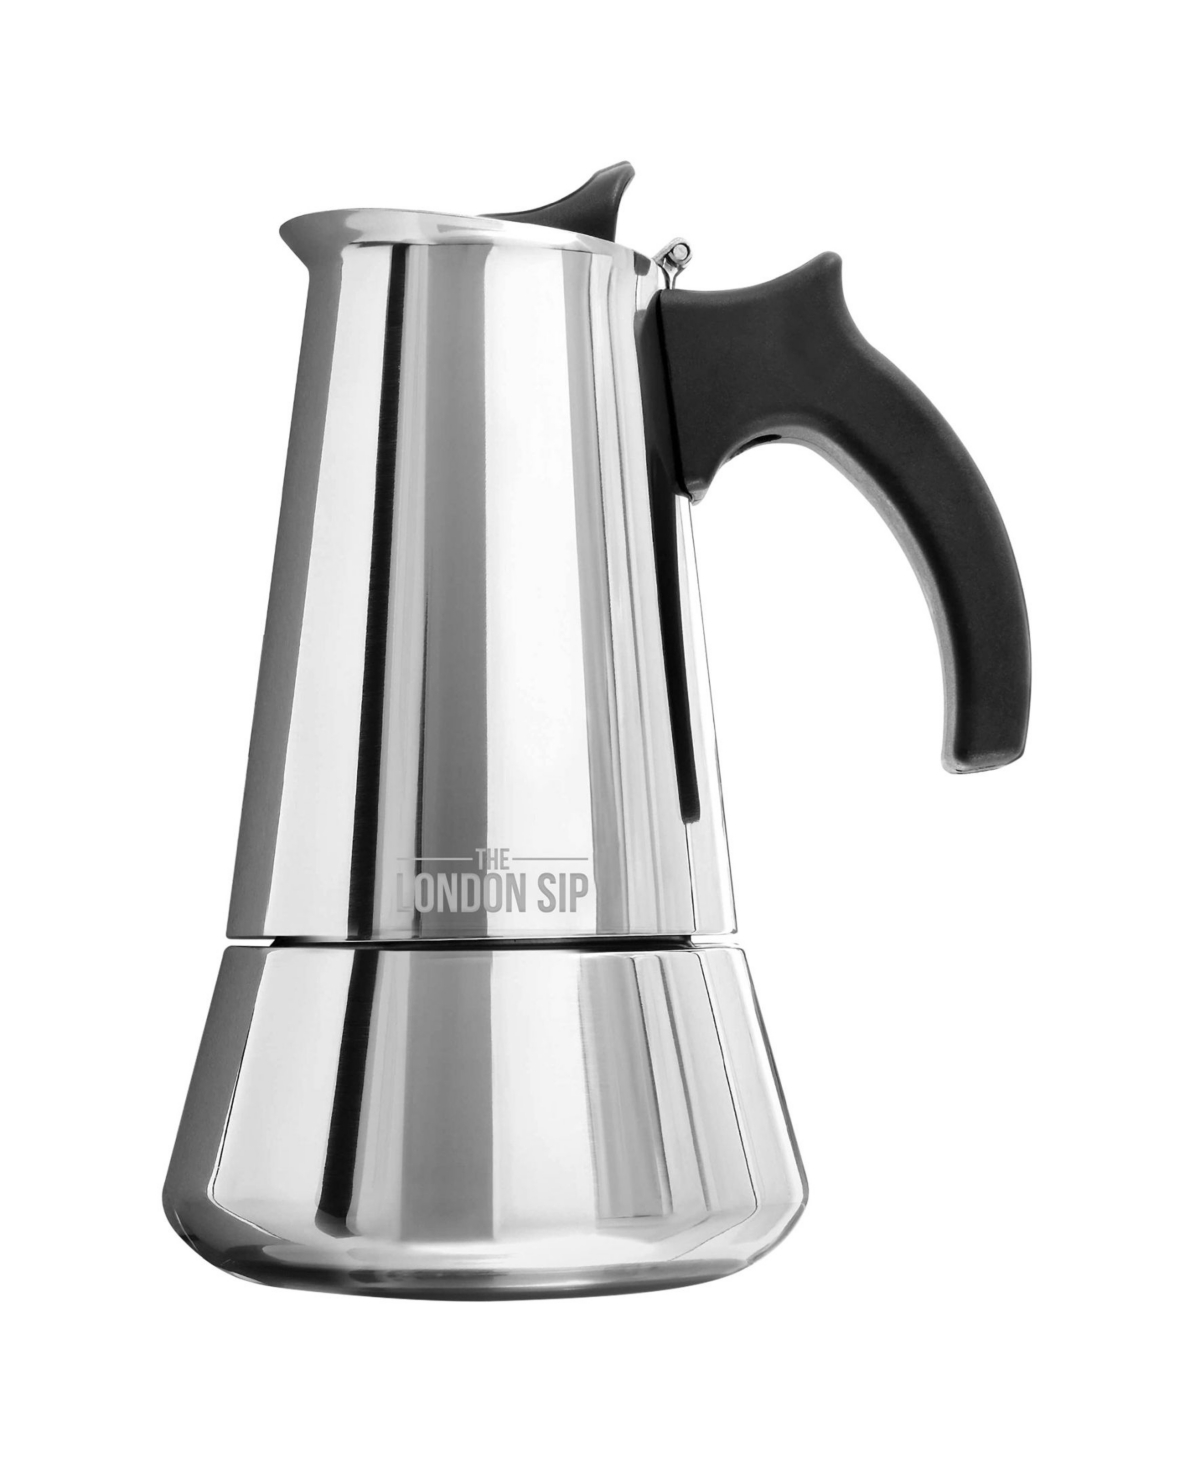 London Sip Stainless Steel Coffee Maker 3-cup In Silver